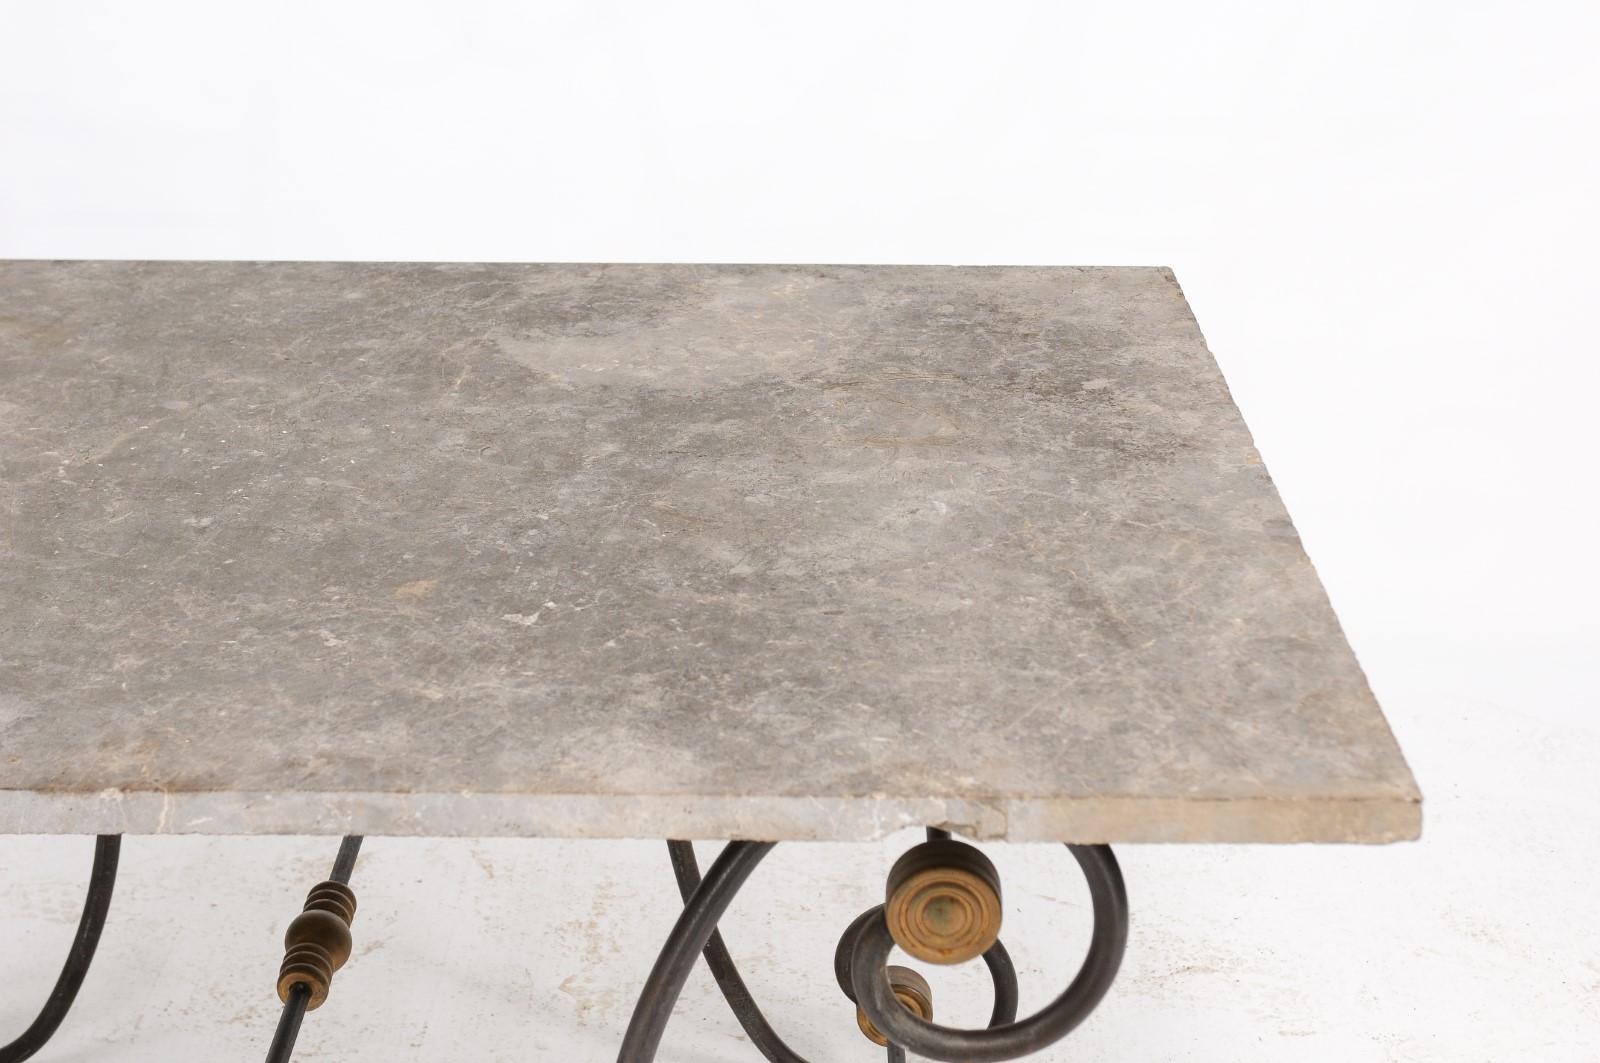 French Butcher Table with Scrolled Iron Base and Wooden Top, Late 19th Century For Sale 5